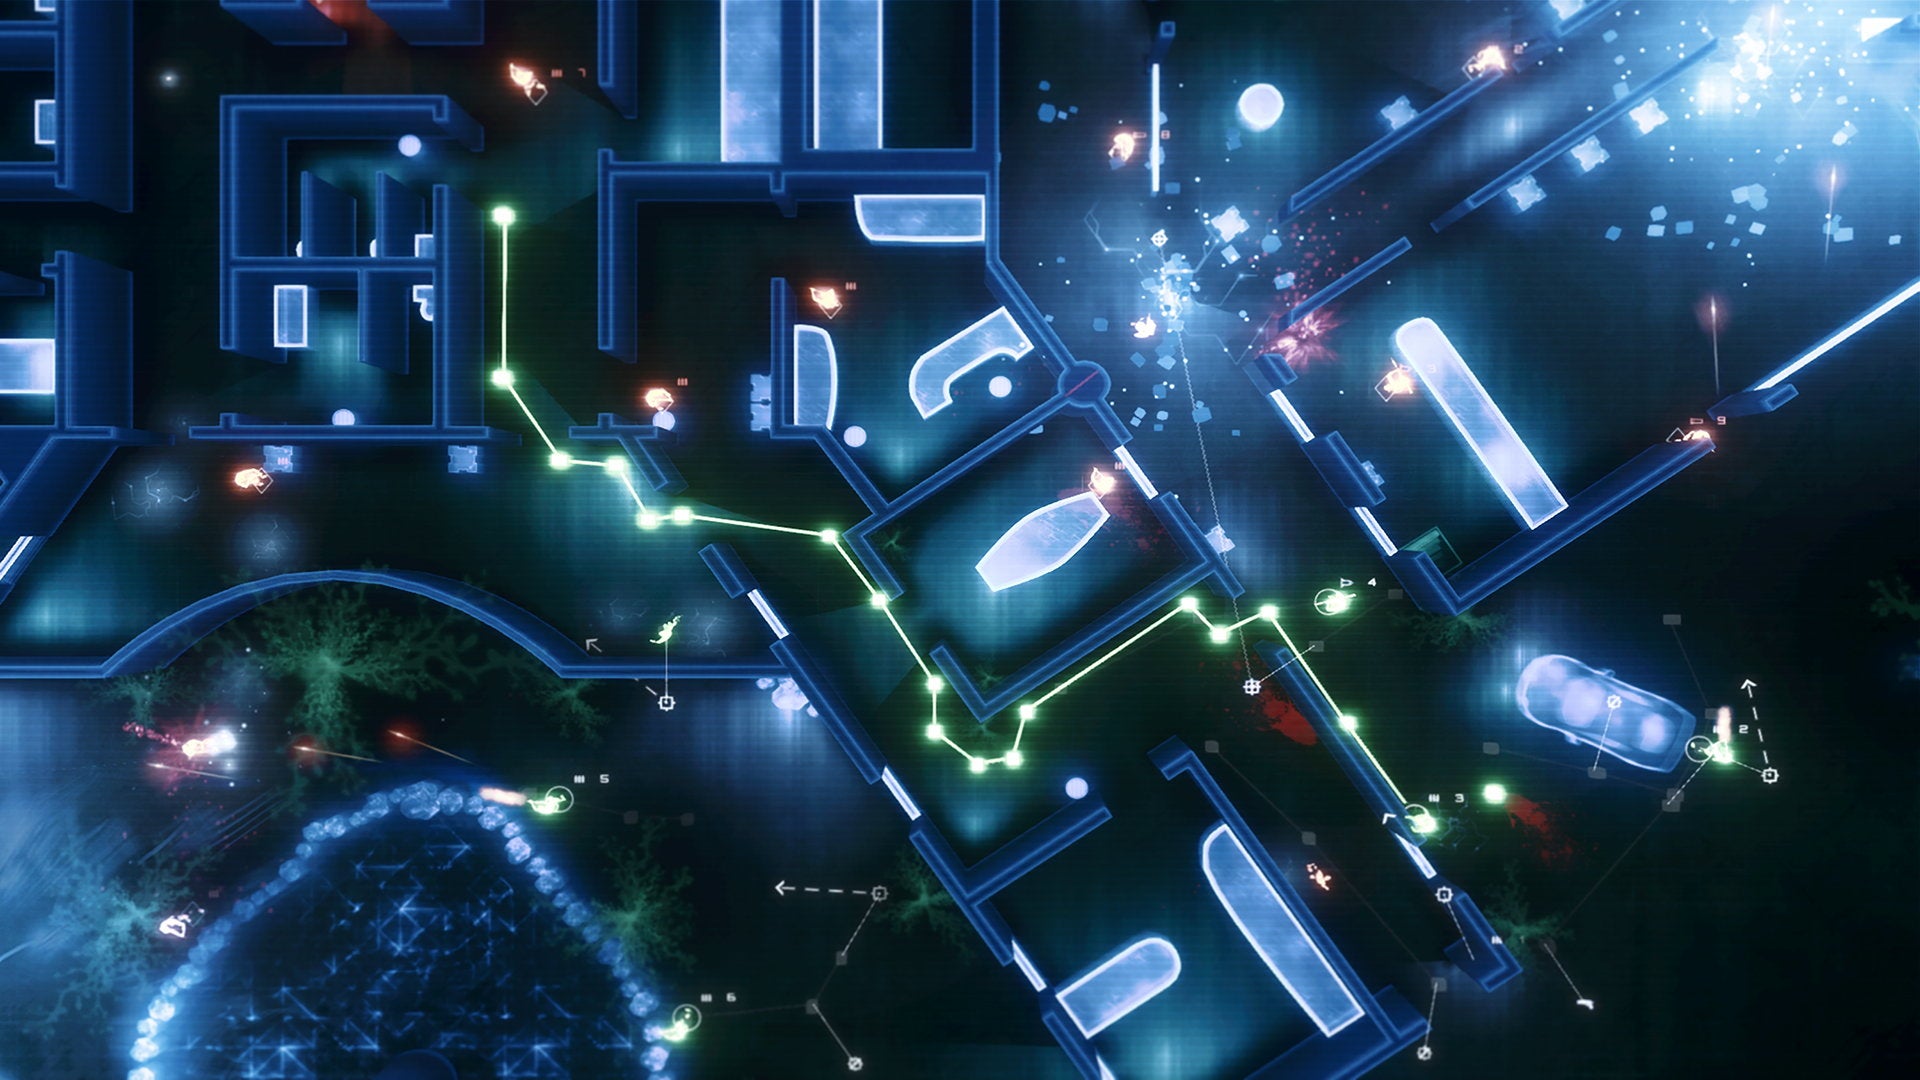 Image for Frozen Synapse 2 kicking in the door to August